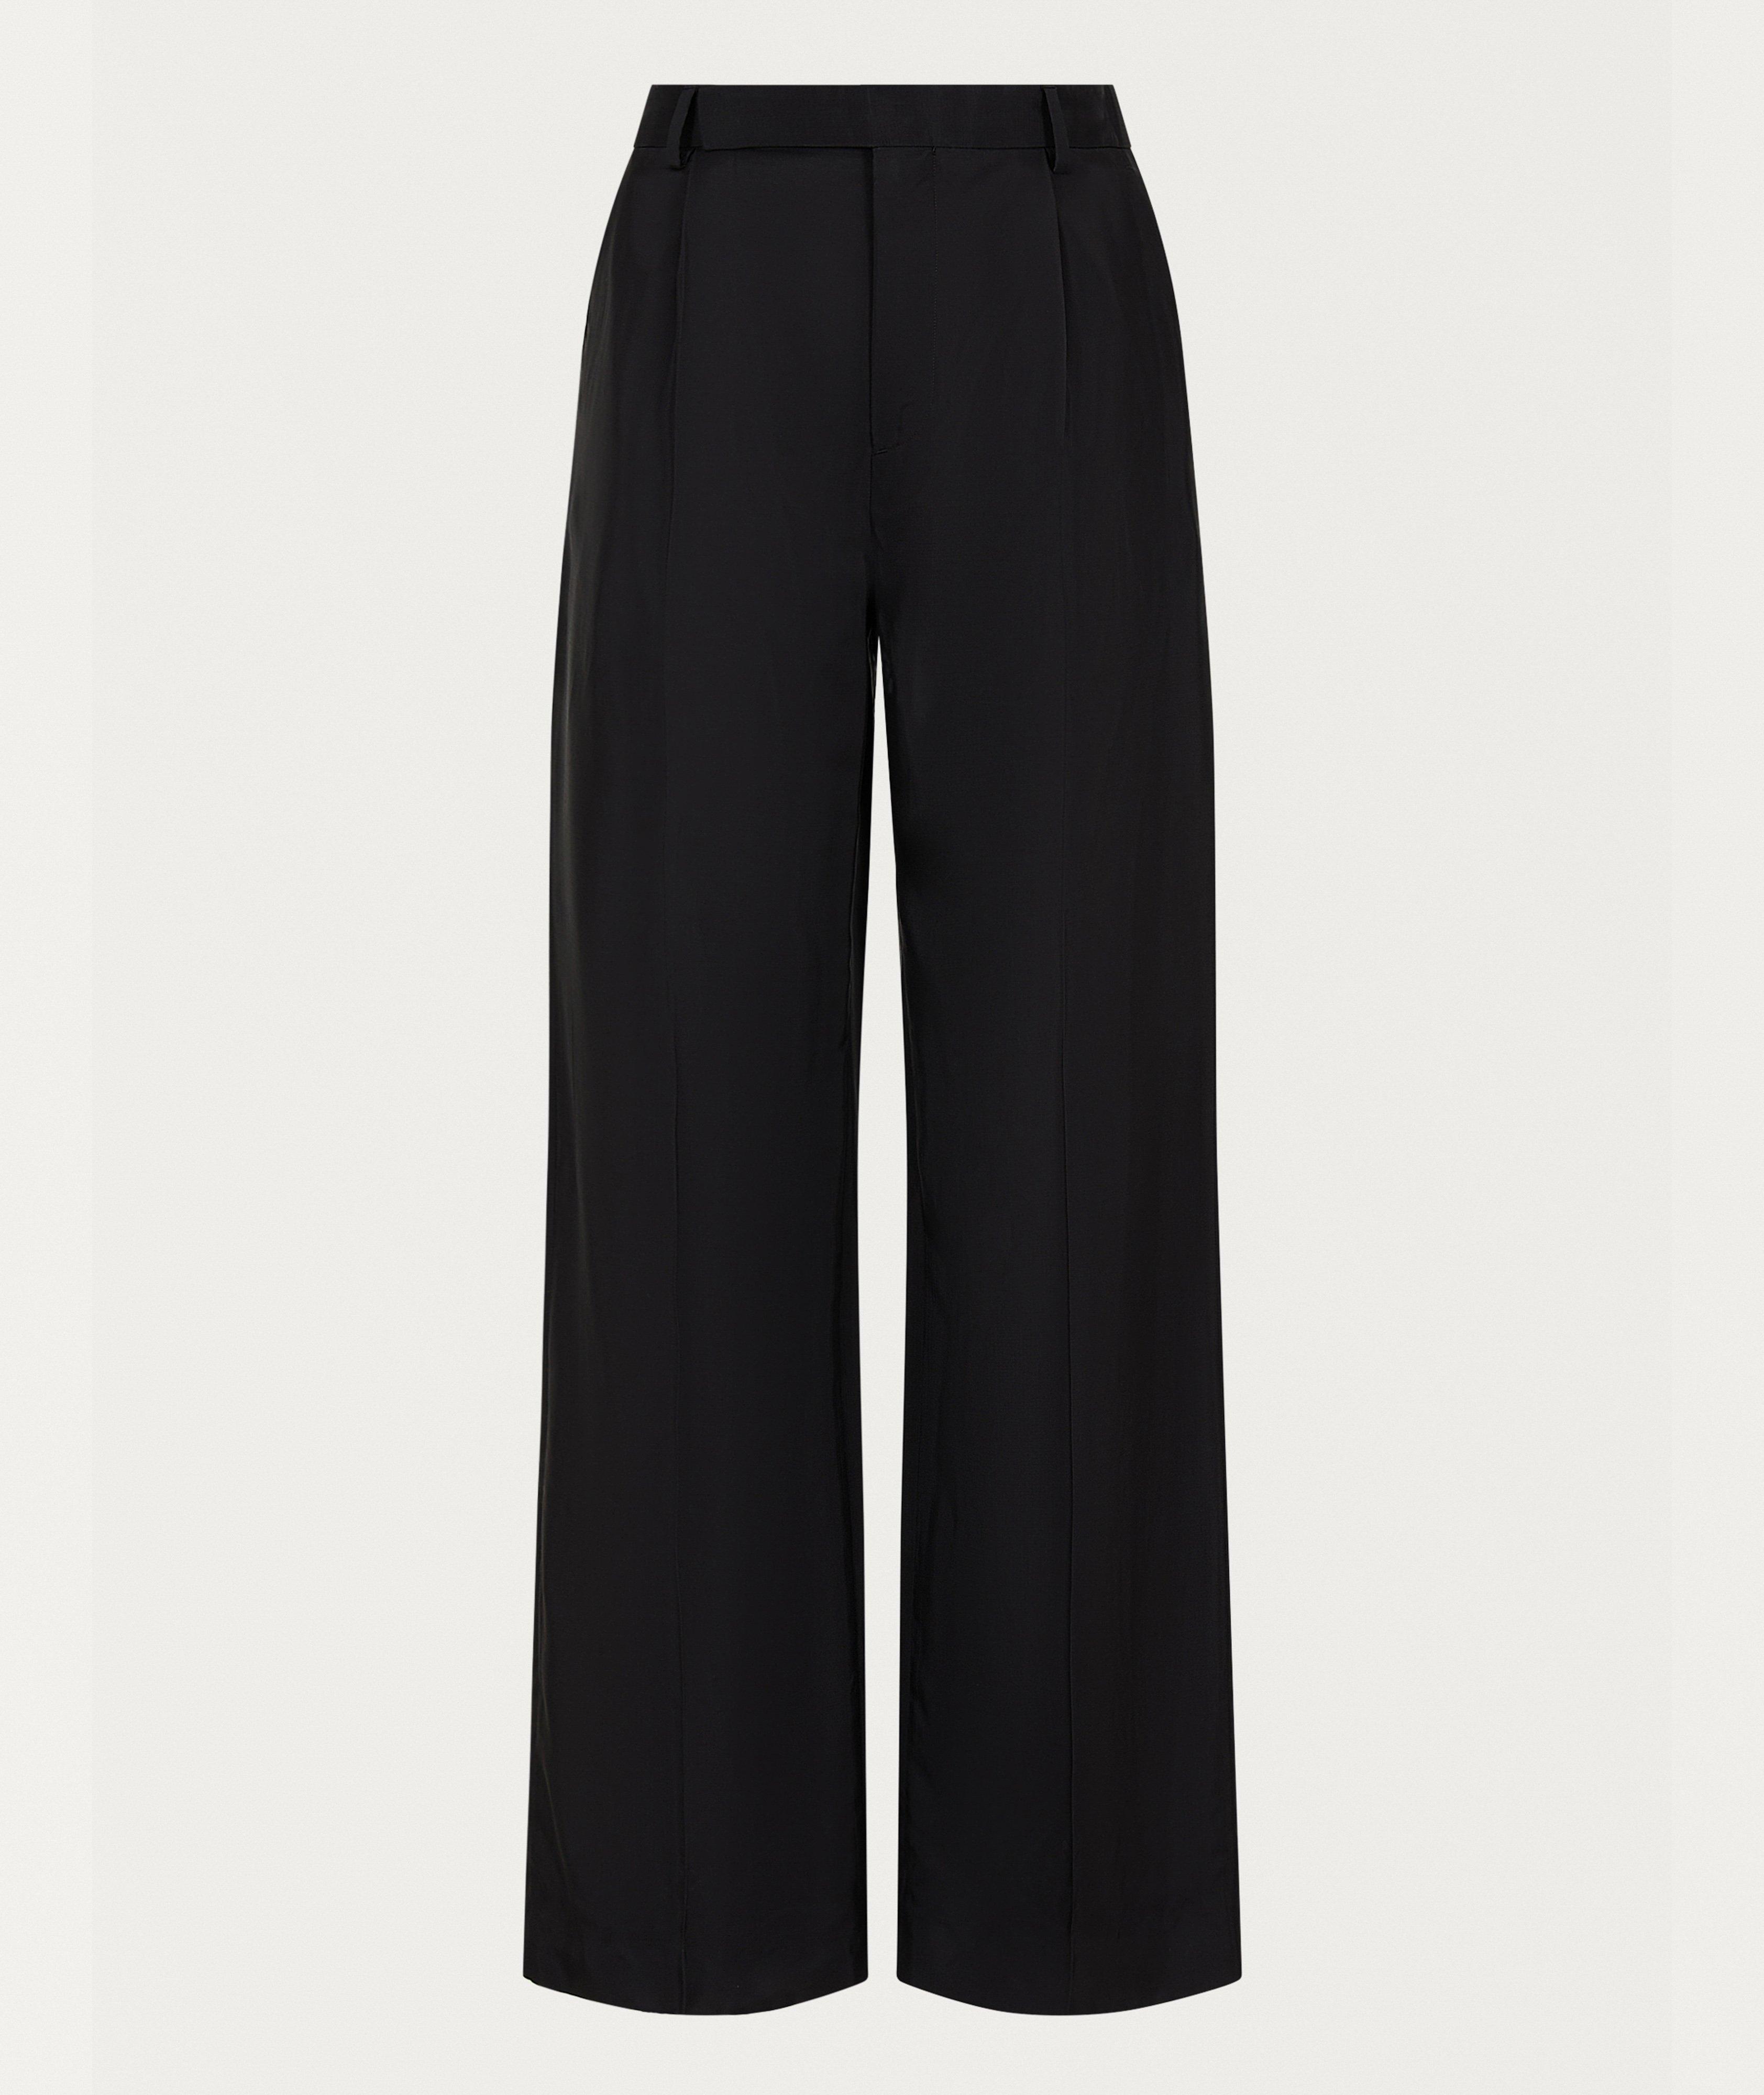 Pleated Fluid Micro Ripstop Weave Trousers image 0